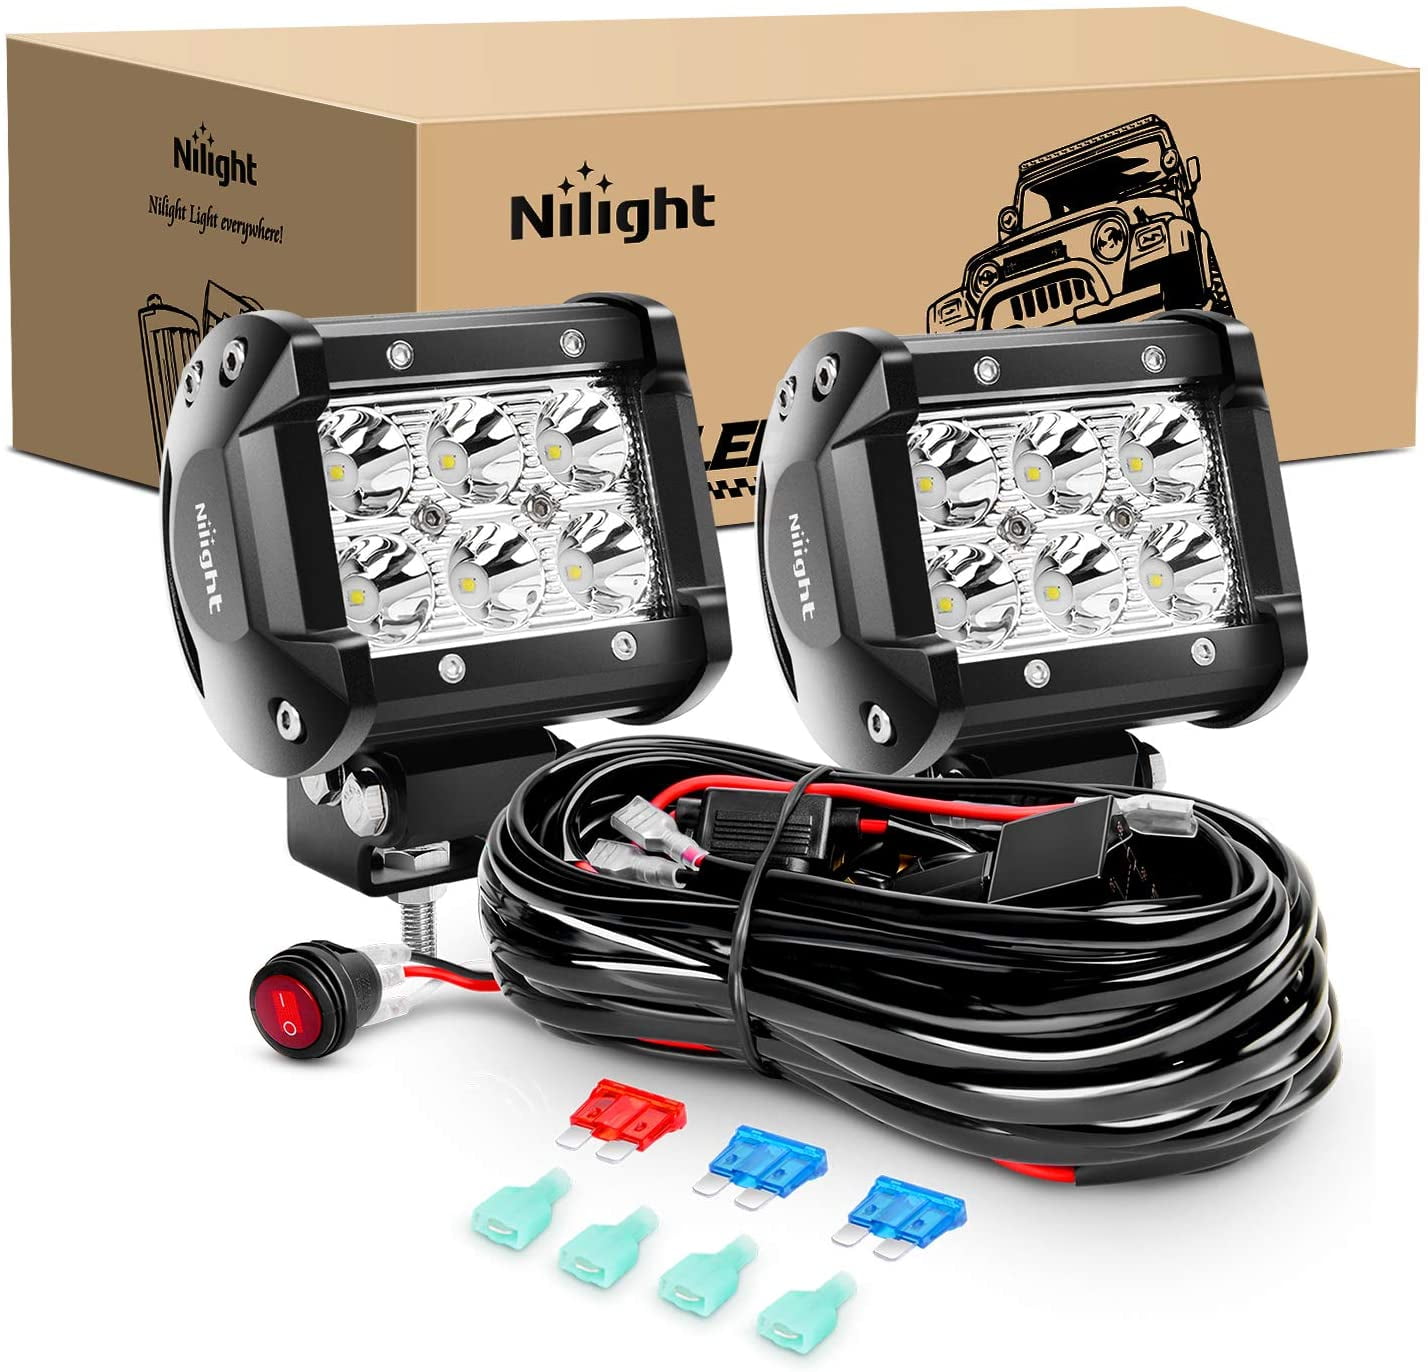 20inch 126W LED Work Light Bar Combo Driving Offroad+2X 18W Spot Lamp+Wiring Kit 